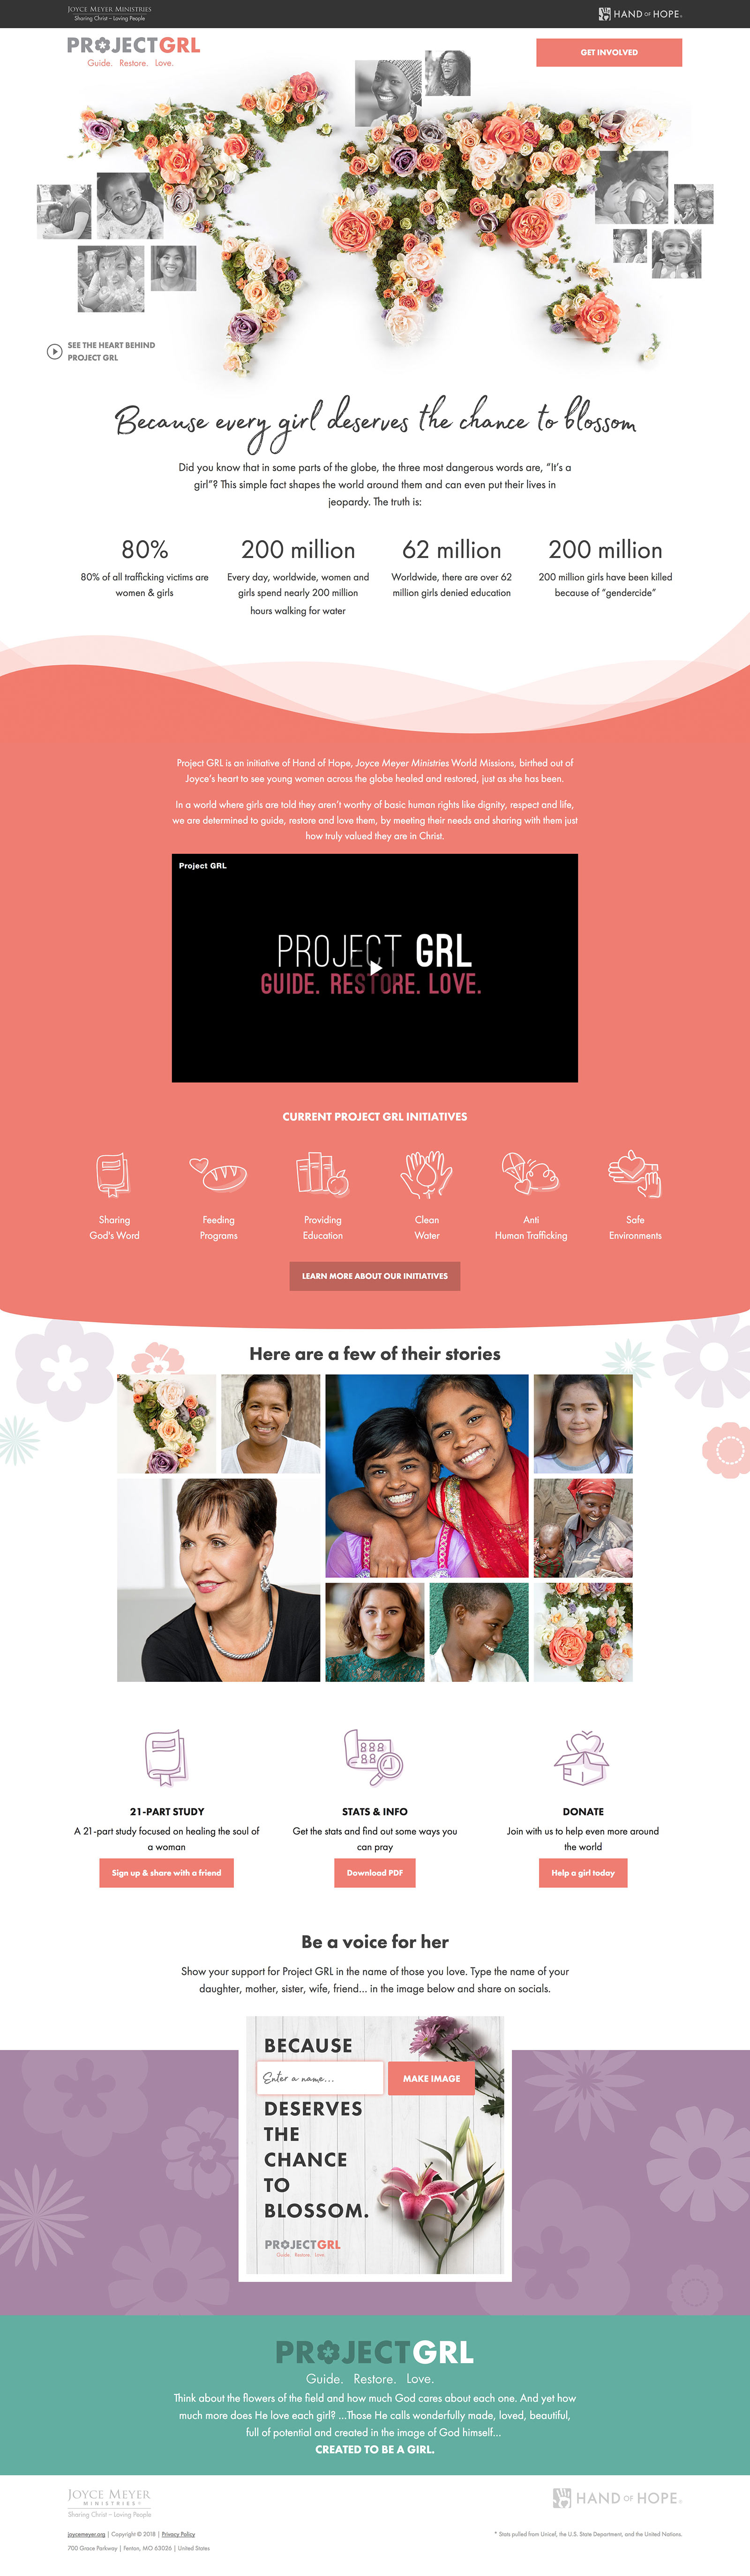 Project GRL website preview from Joyce Meyer Ministries